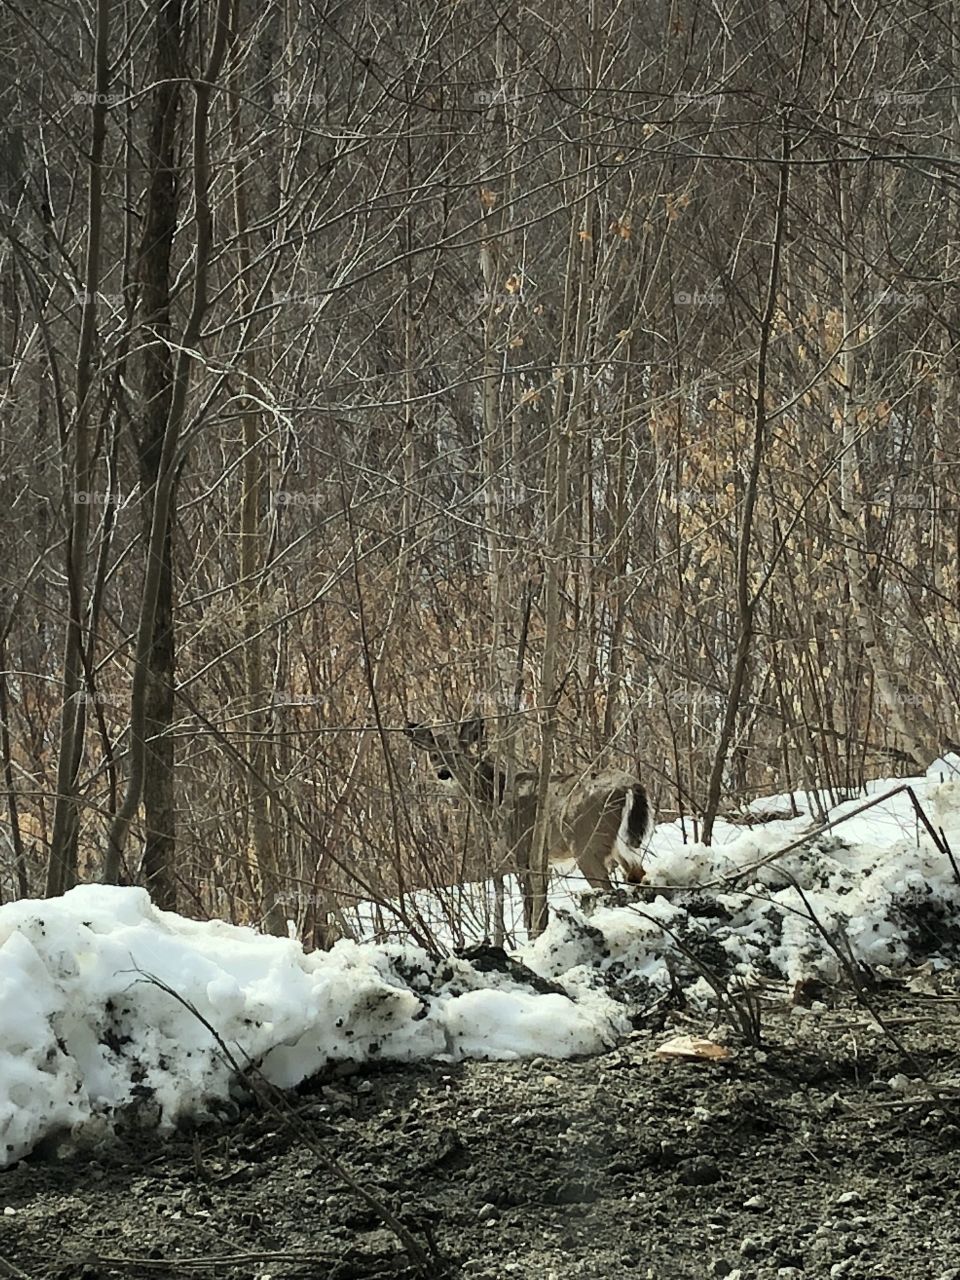 A deer thinks it’s camouflaged by the road